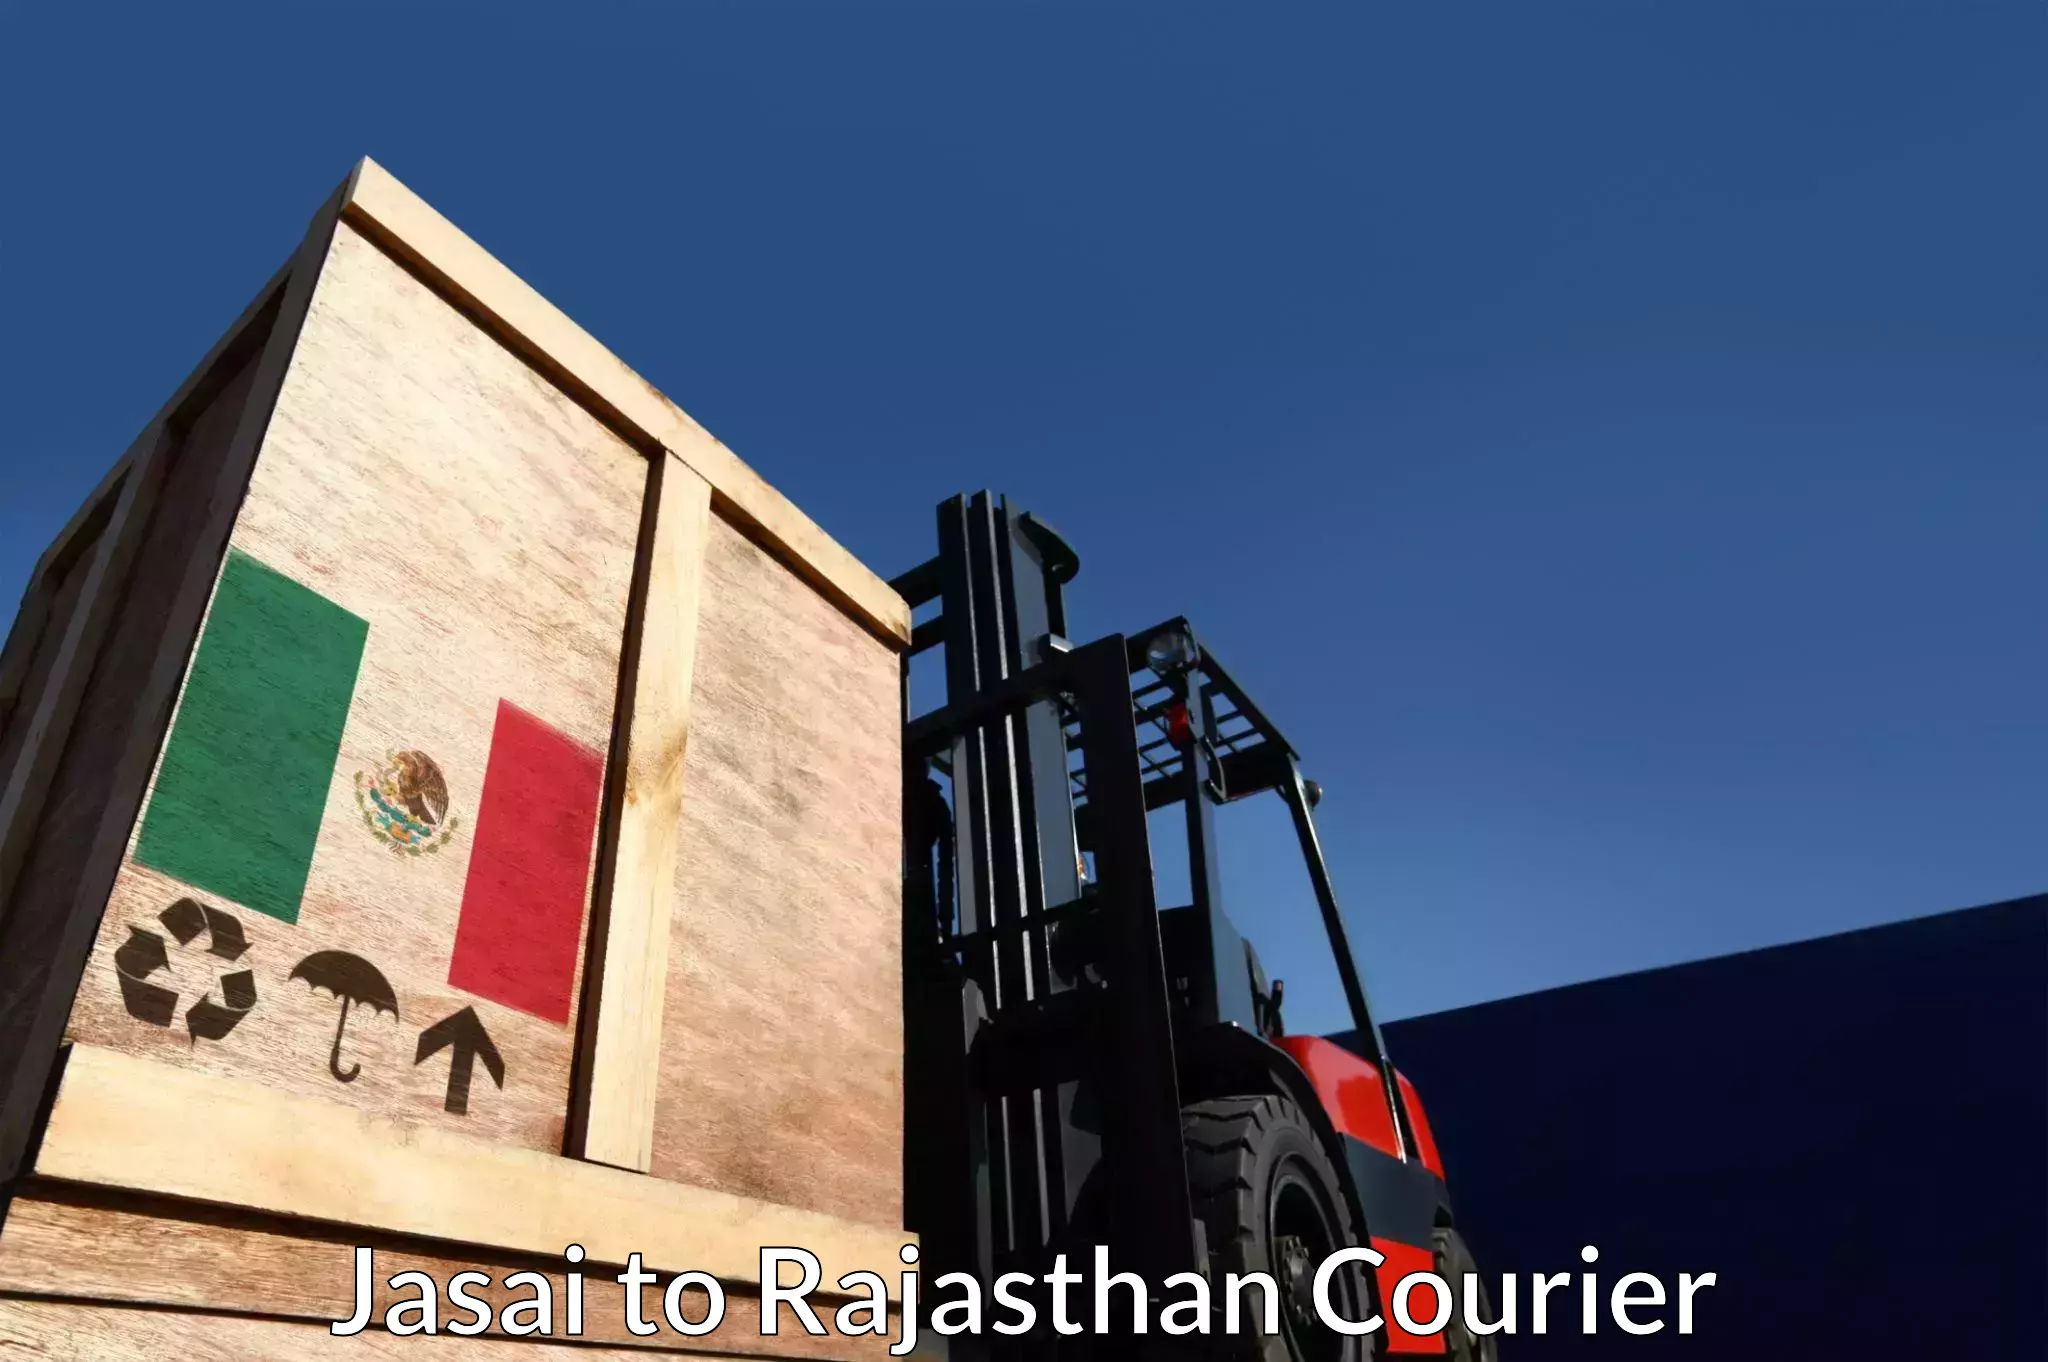 Courier service comparison in Jasai to Rajasthan